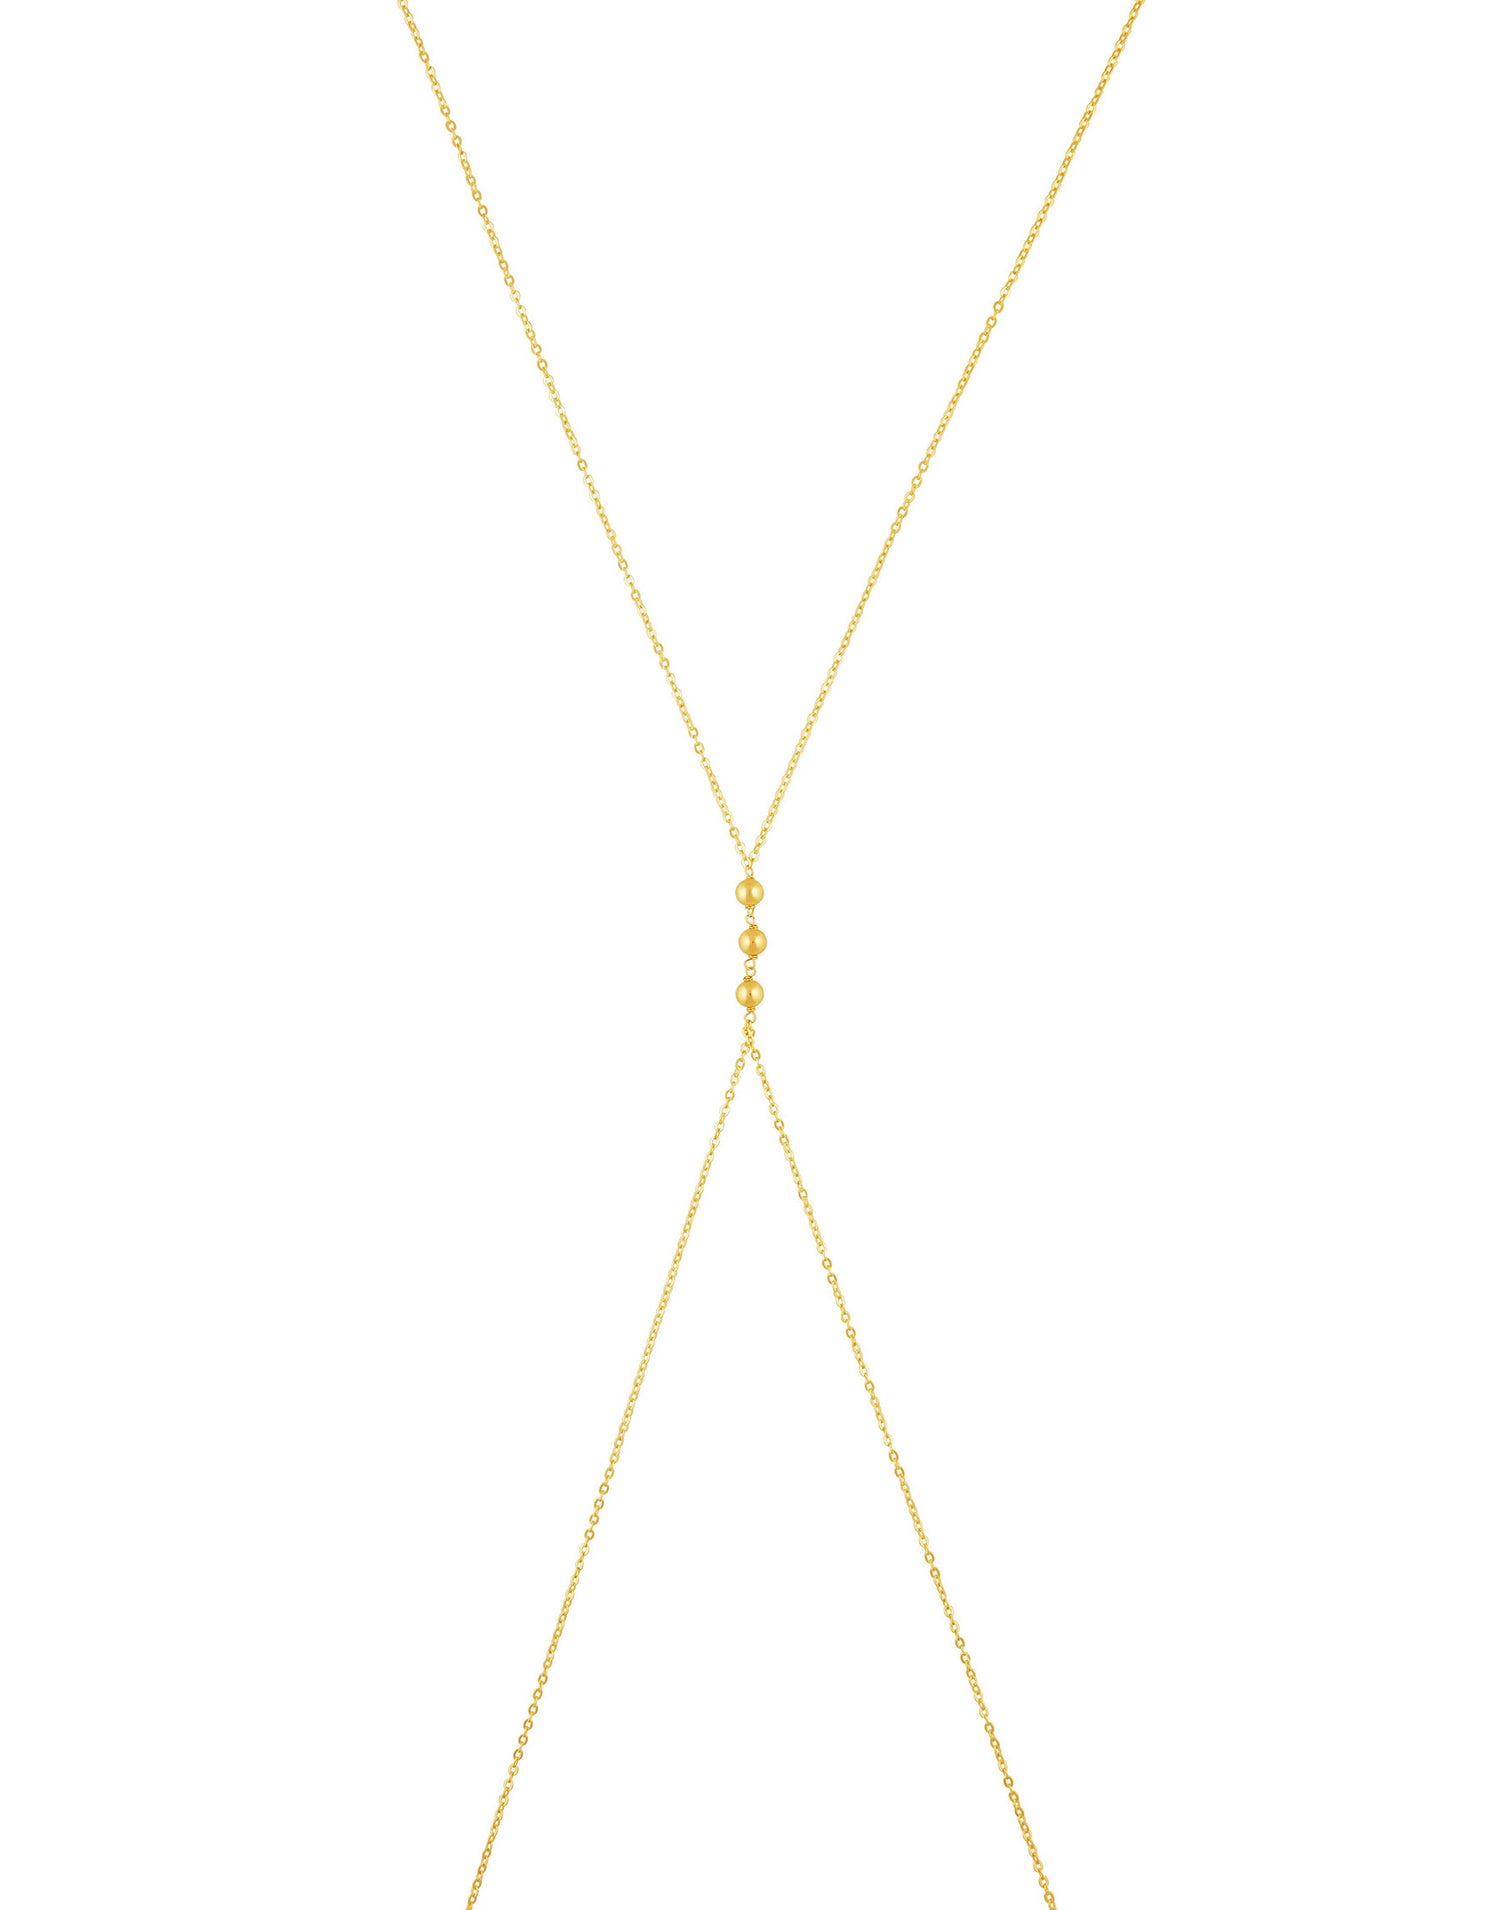 Reign Body Chain by Sahira Jewelry Design in Gold - Product View